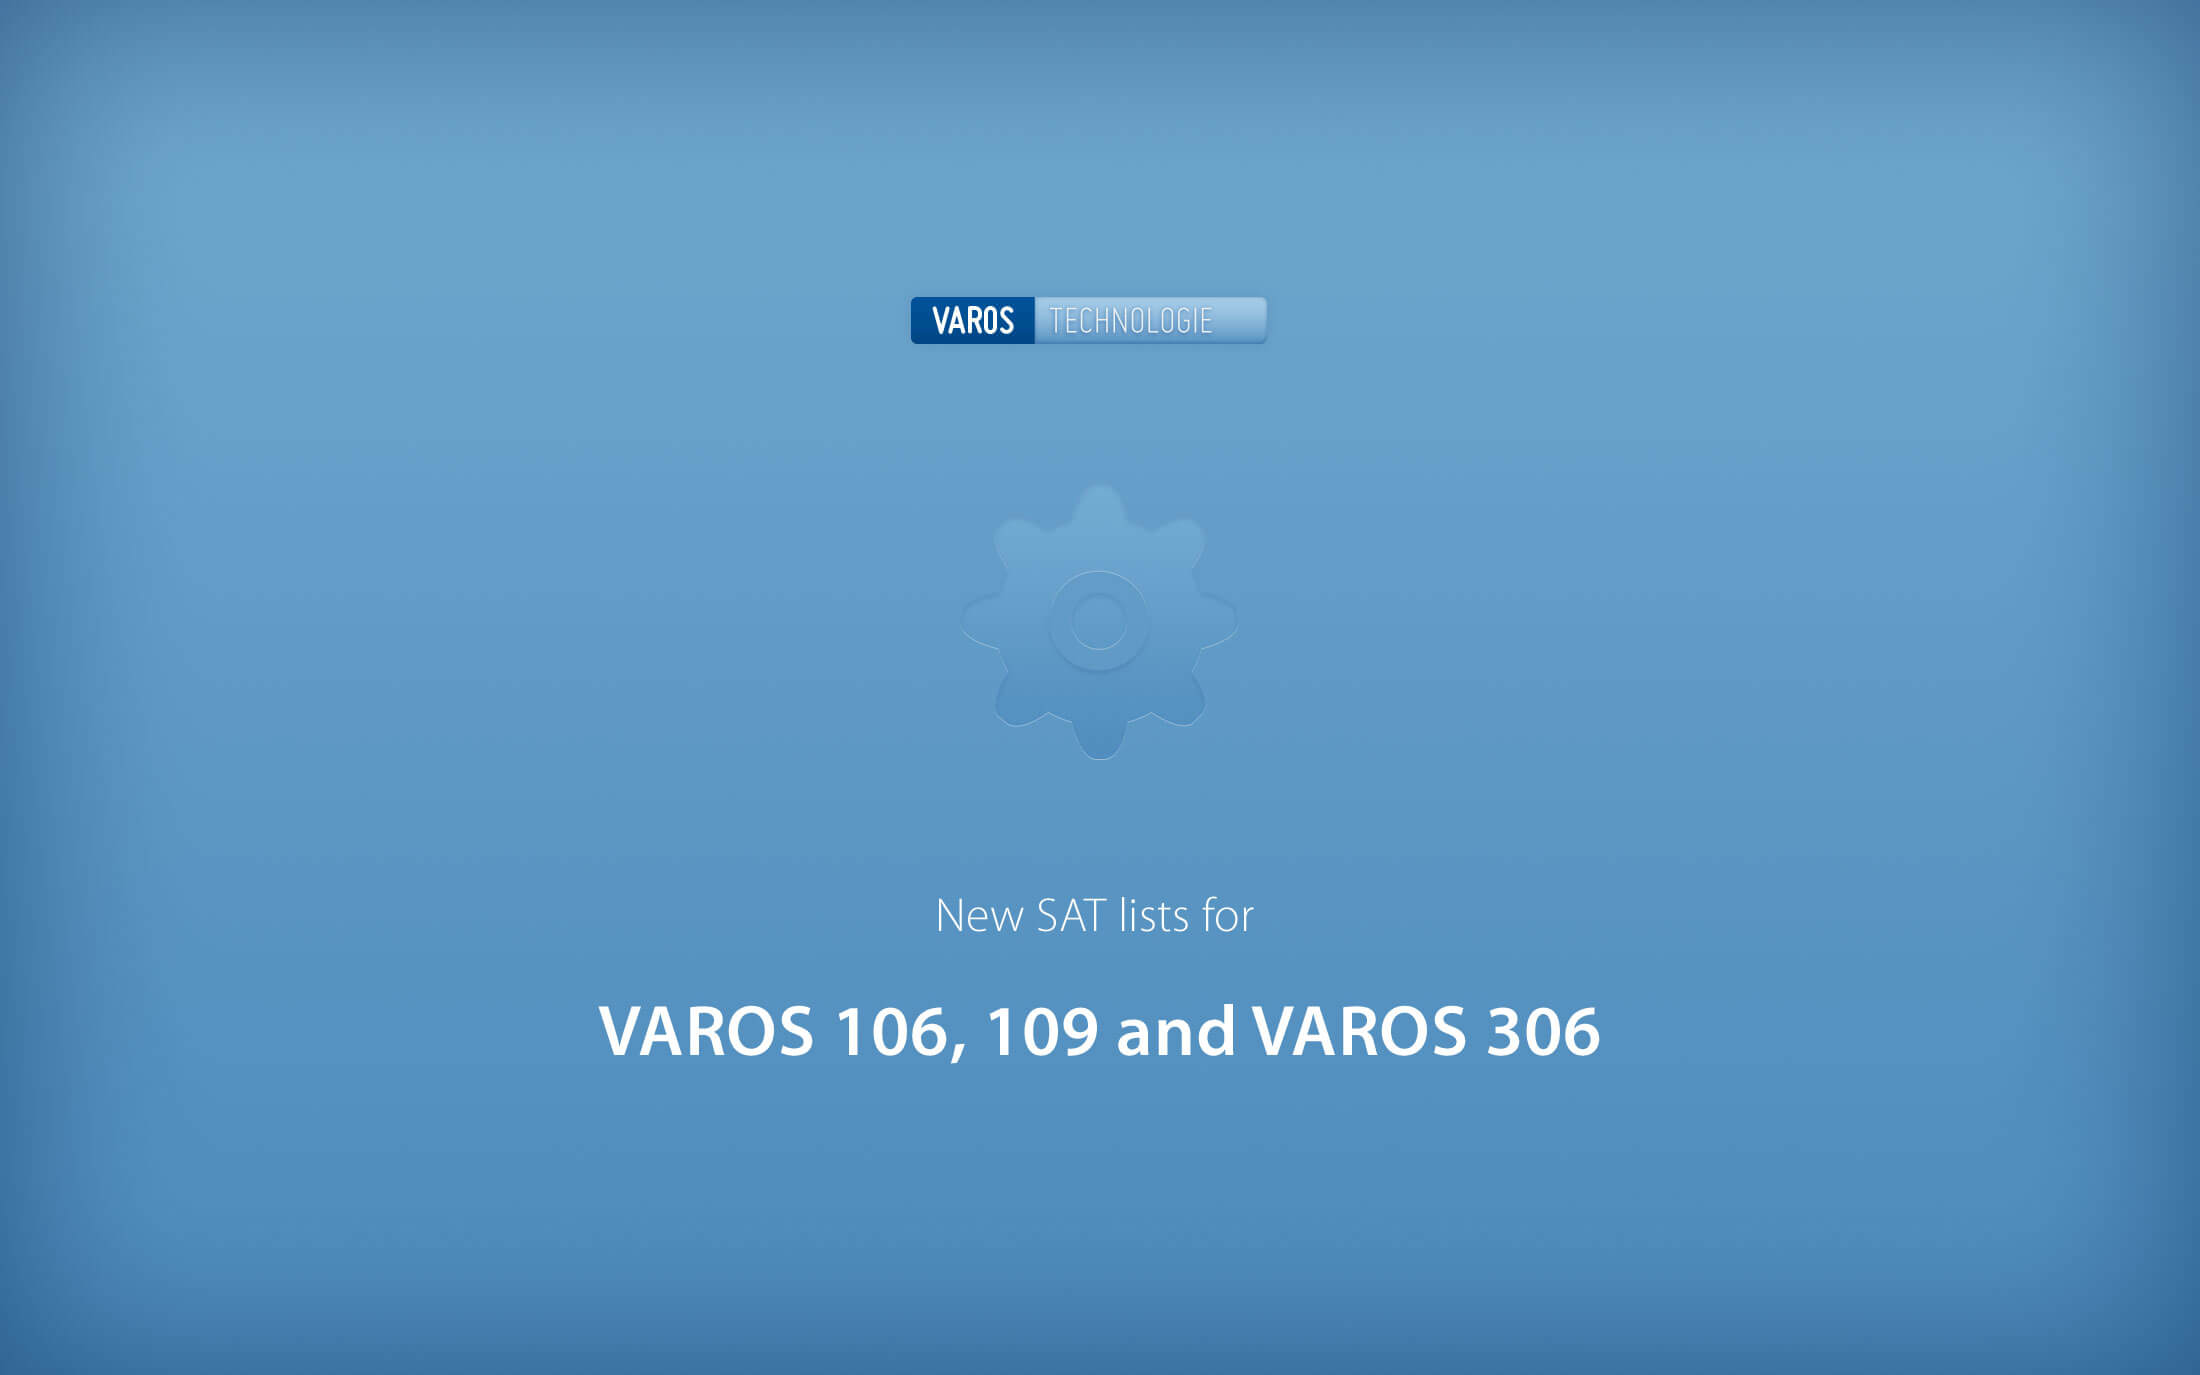 KWS-Electronic VAROS Technology: updated SAT lists VAROS 106, 109 and 306